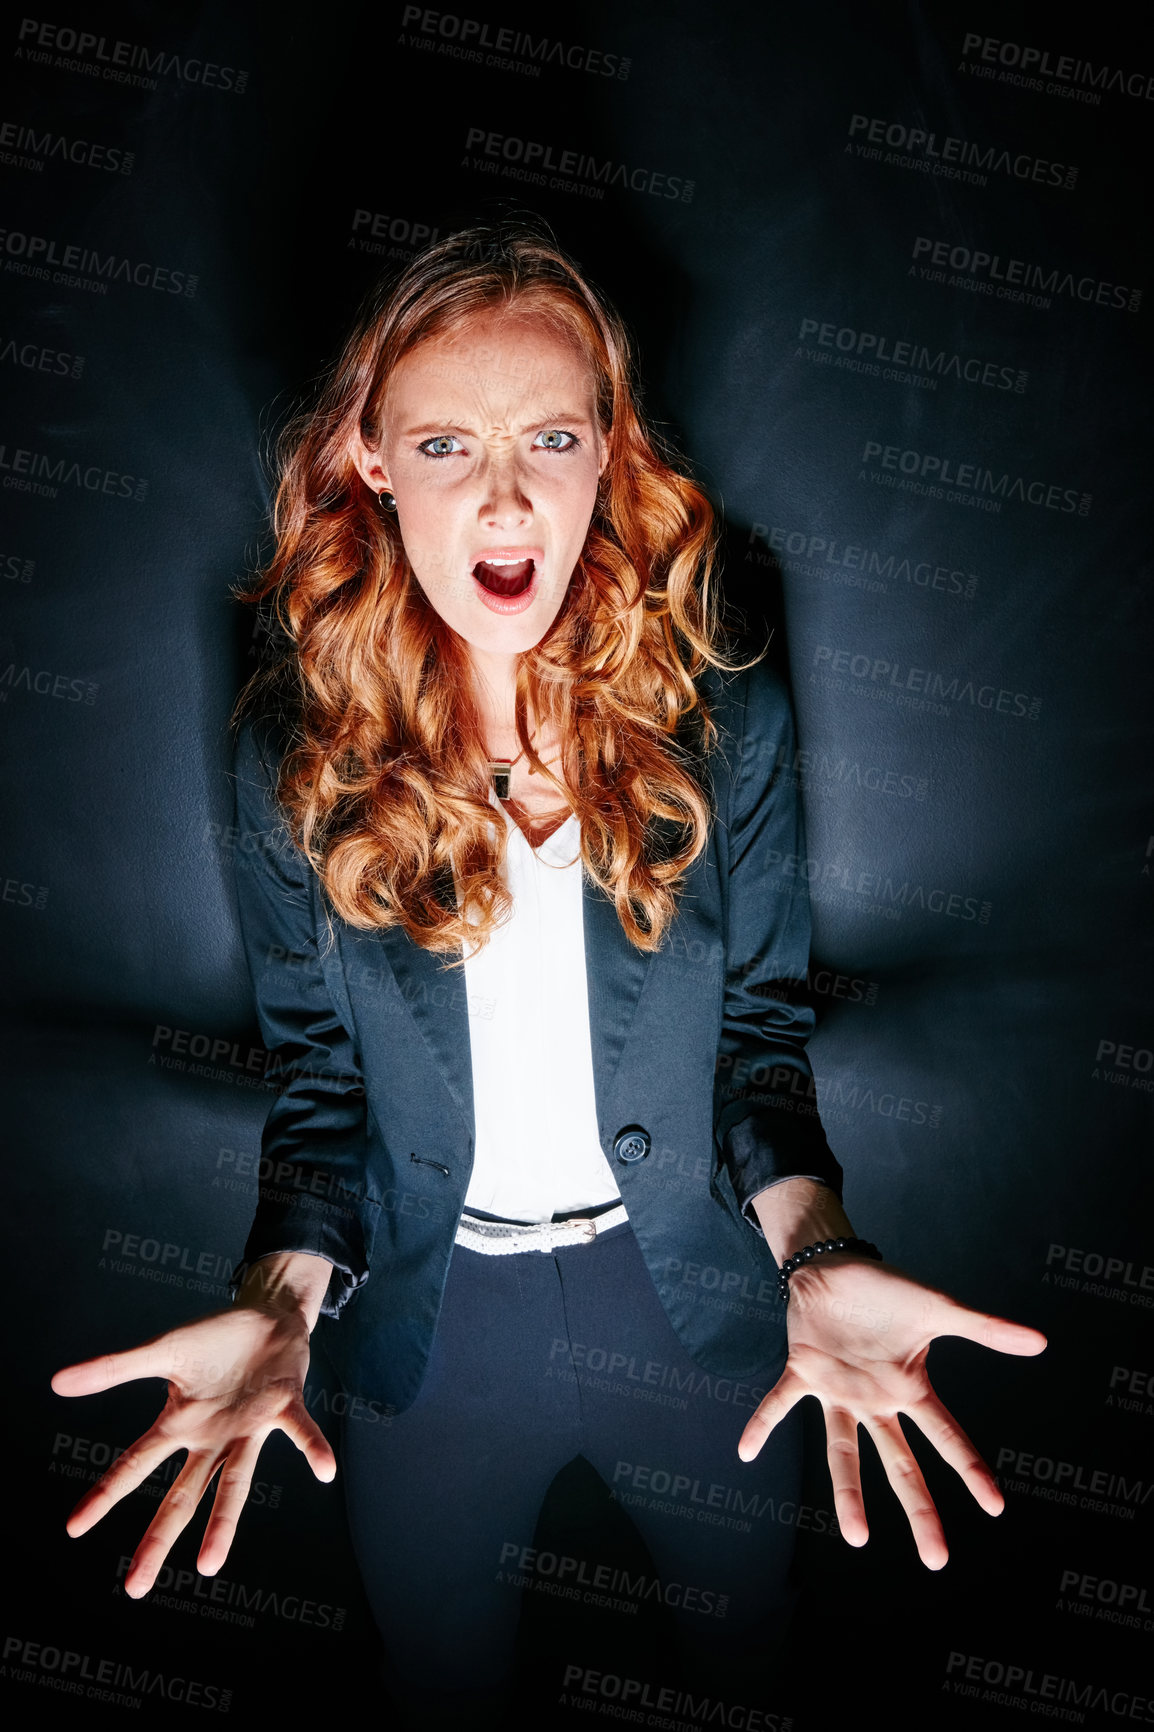 Buy stock photo Studio portrait of a shocked looking young woman standing against a dark background